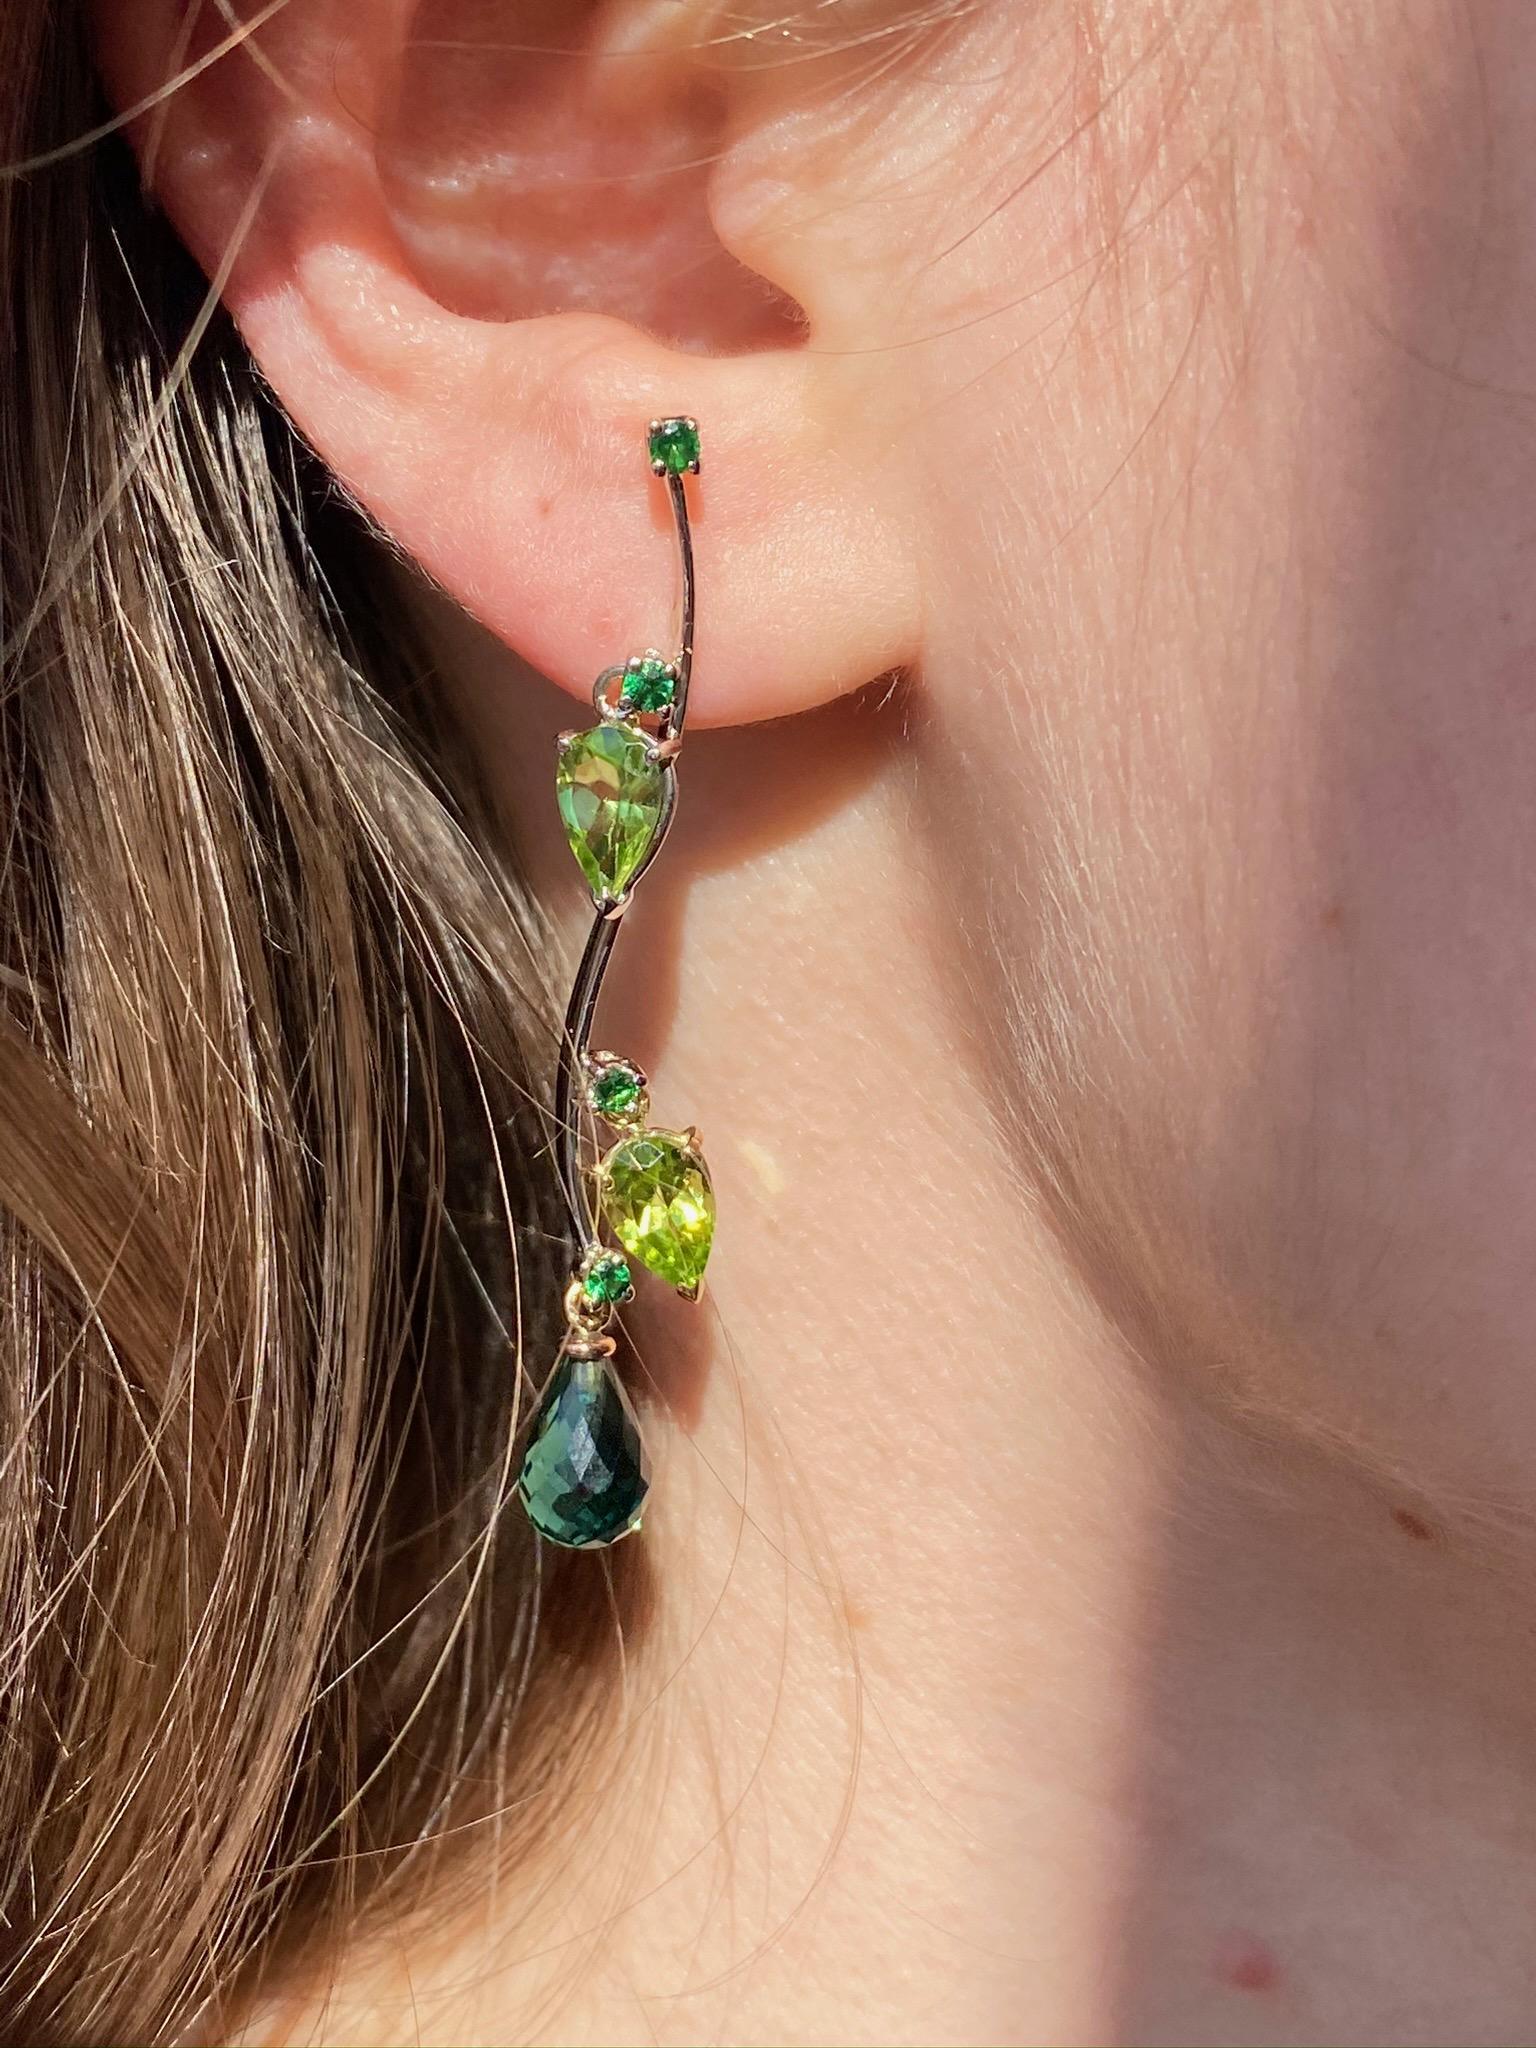 Rossella Ugolini Design Collection a Romantic dangle earrings handcrafted in 18 Karats Gold with three shade of green colors:  Peridot pear cut,  Tsavorite round cut , green Tourmaline Briolet drops.  The branches of the trees of Villa Borghese in